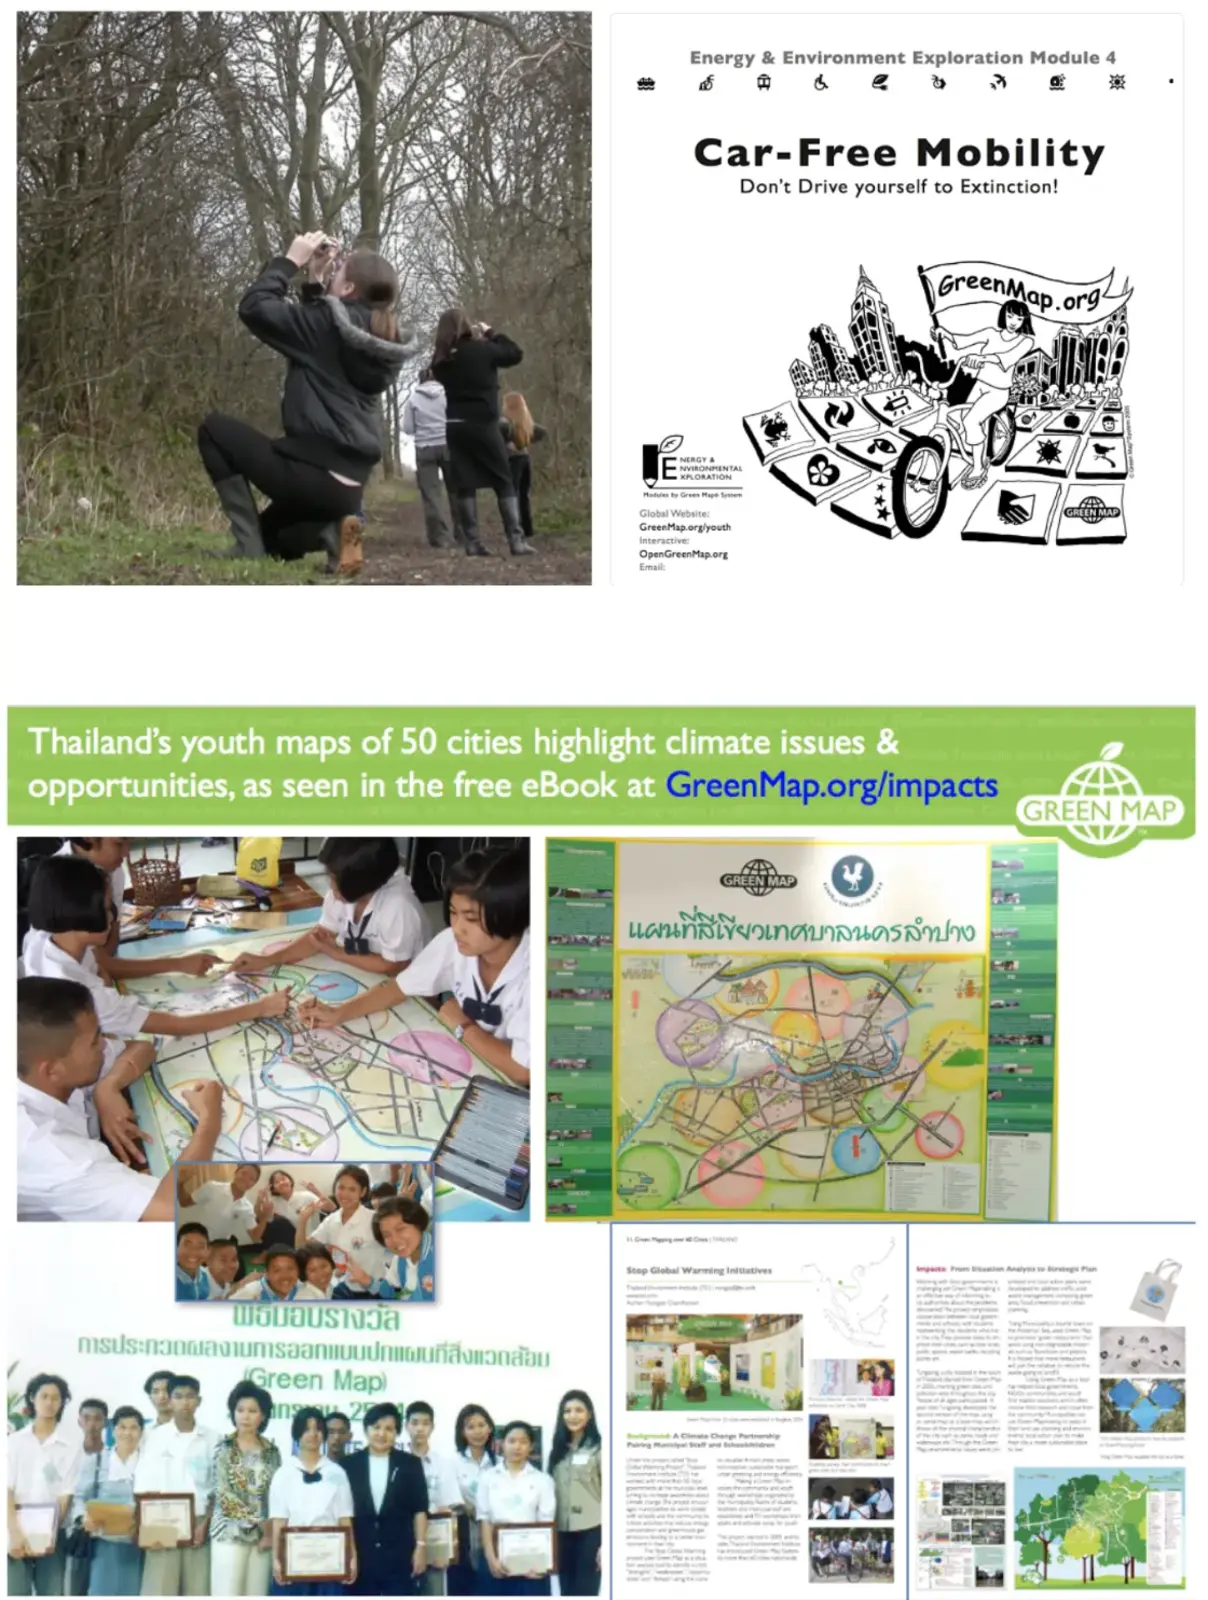 Images from Scottish and Thai Green Map Projects